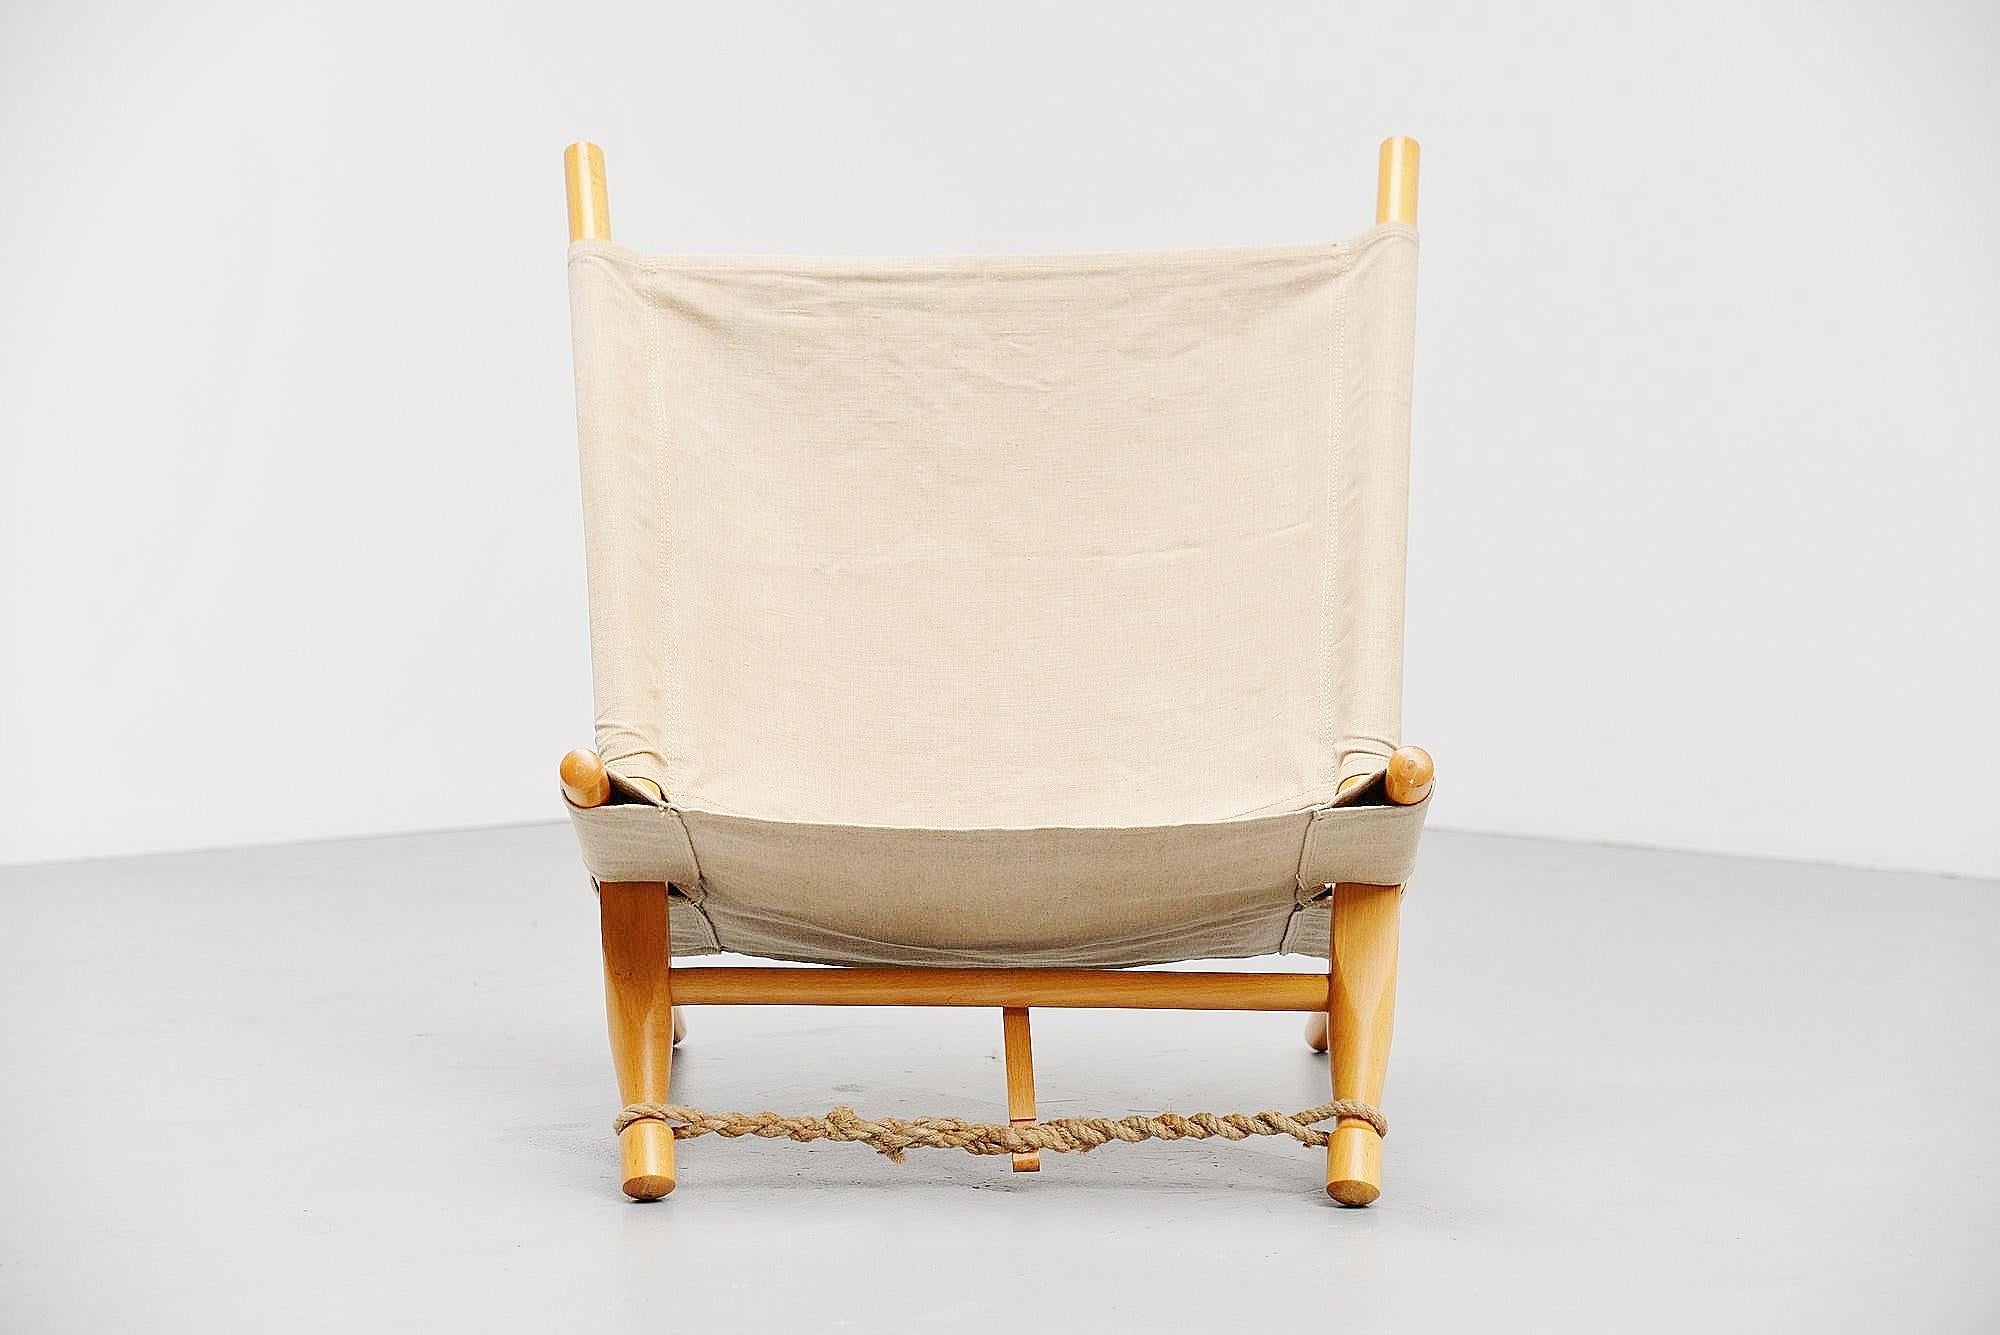 Very nice dynamic low lounge chair designed by Ole Gjerløv-Knudsen, manufactured by Cado, Denmark, 1958. The chair has a birch wooden frame existing in 4 parts sliding in each other to change the angle if wanted. The canvas seat and the rope